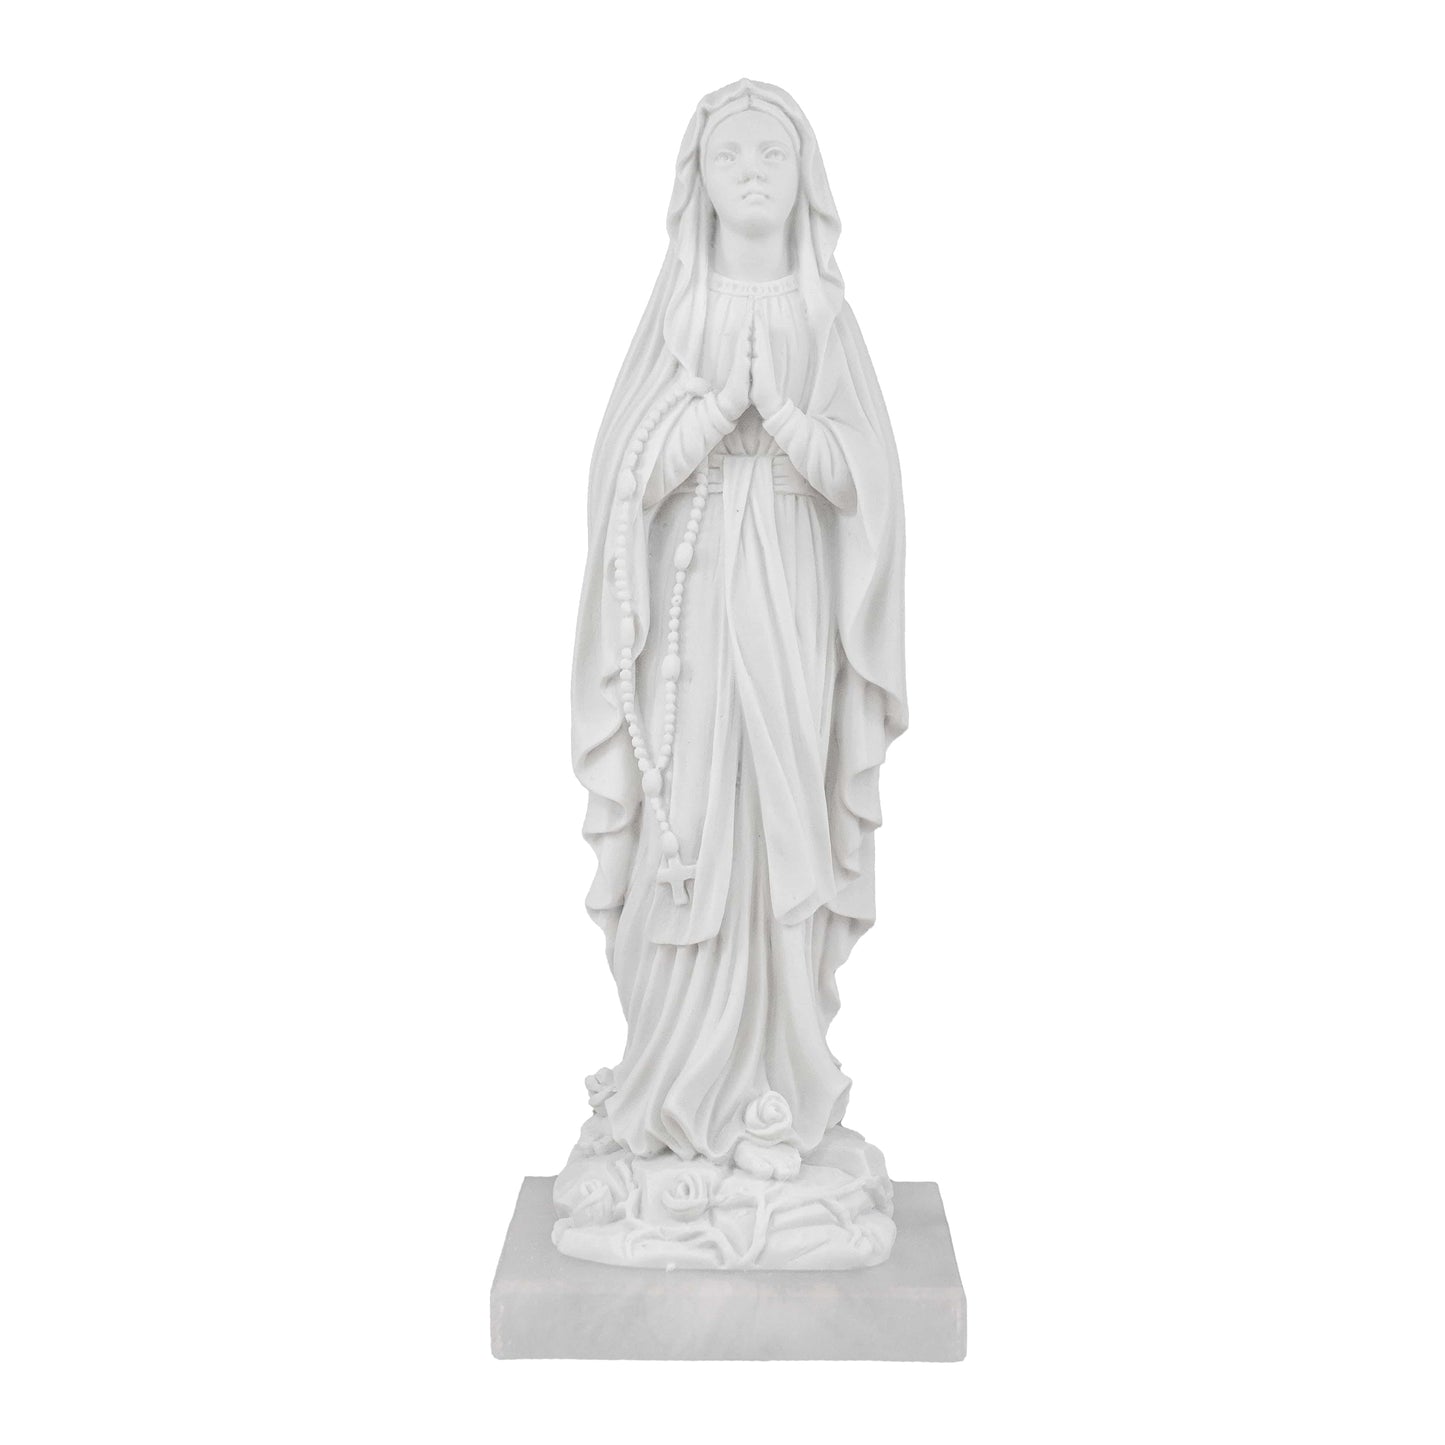 MONDO CATTOLICO 40 cm Our Lady of Lourdes with Roses White Marble Dust